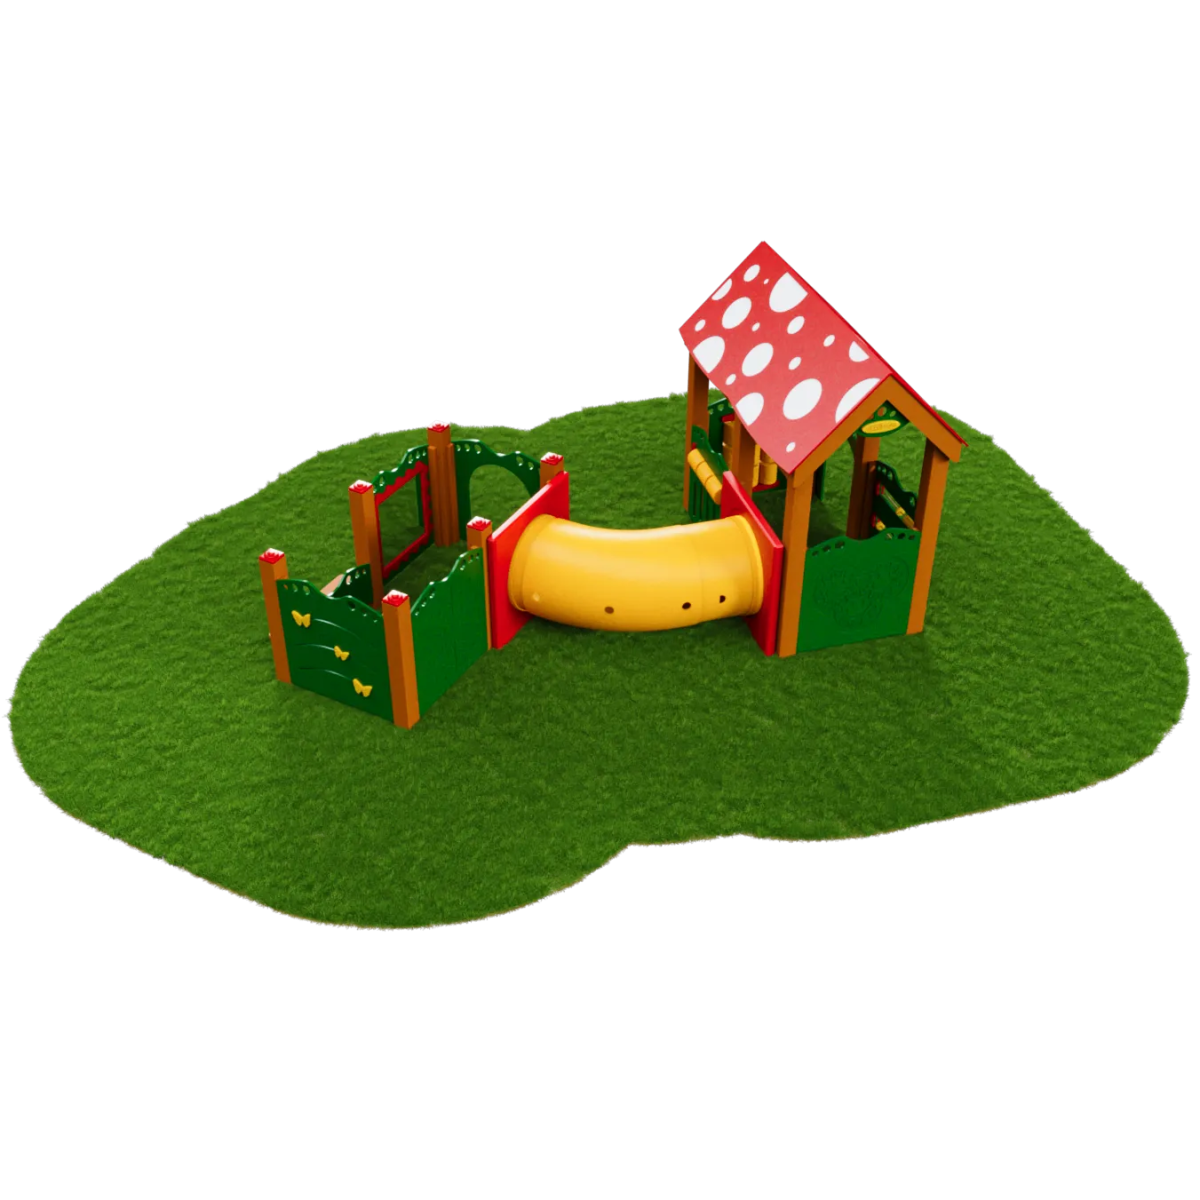 Gnome's Manor Playset - Toddler Playgrounds - Playtopia, Inc.